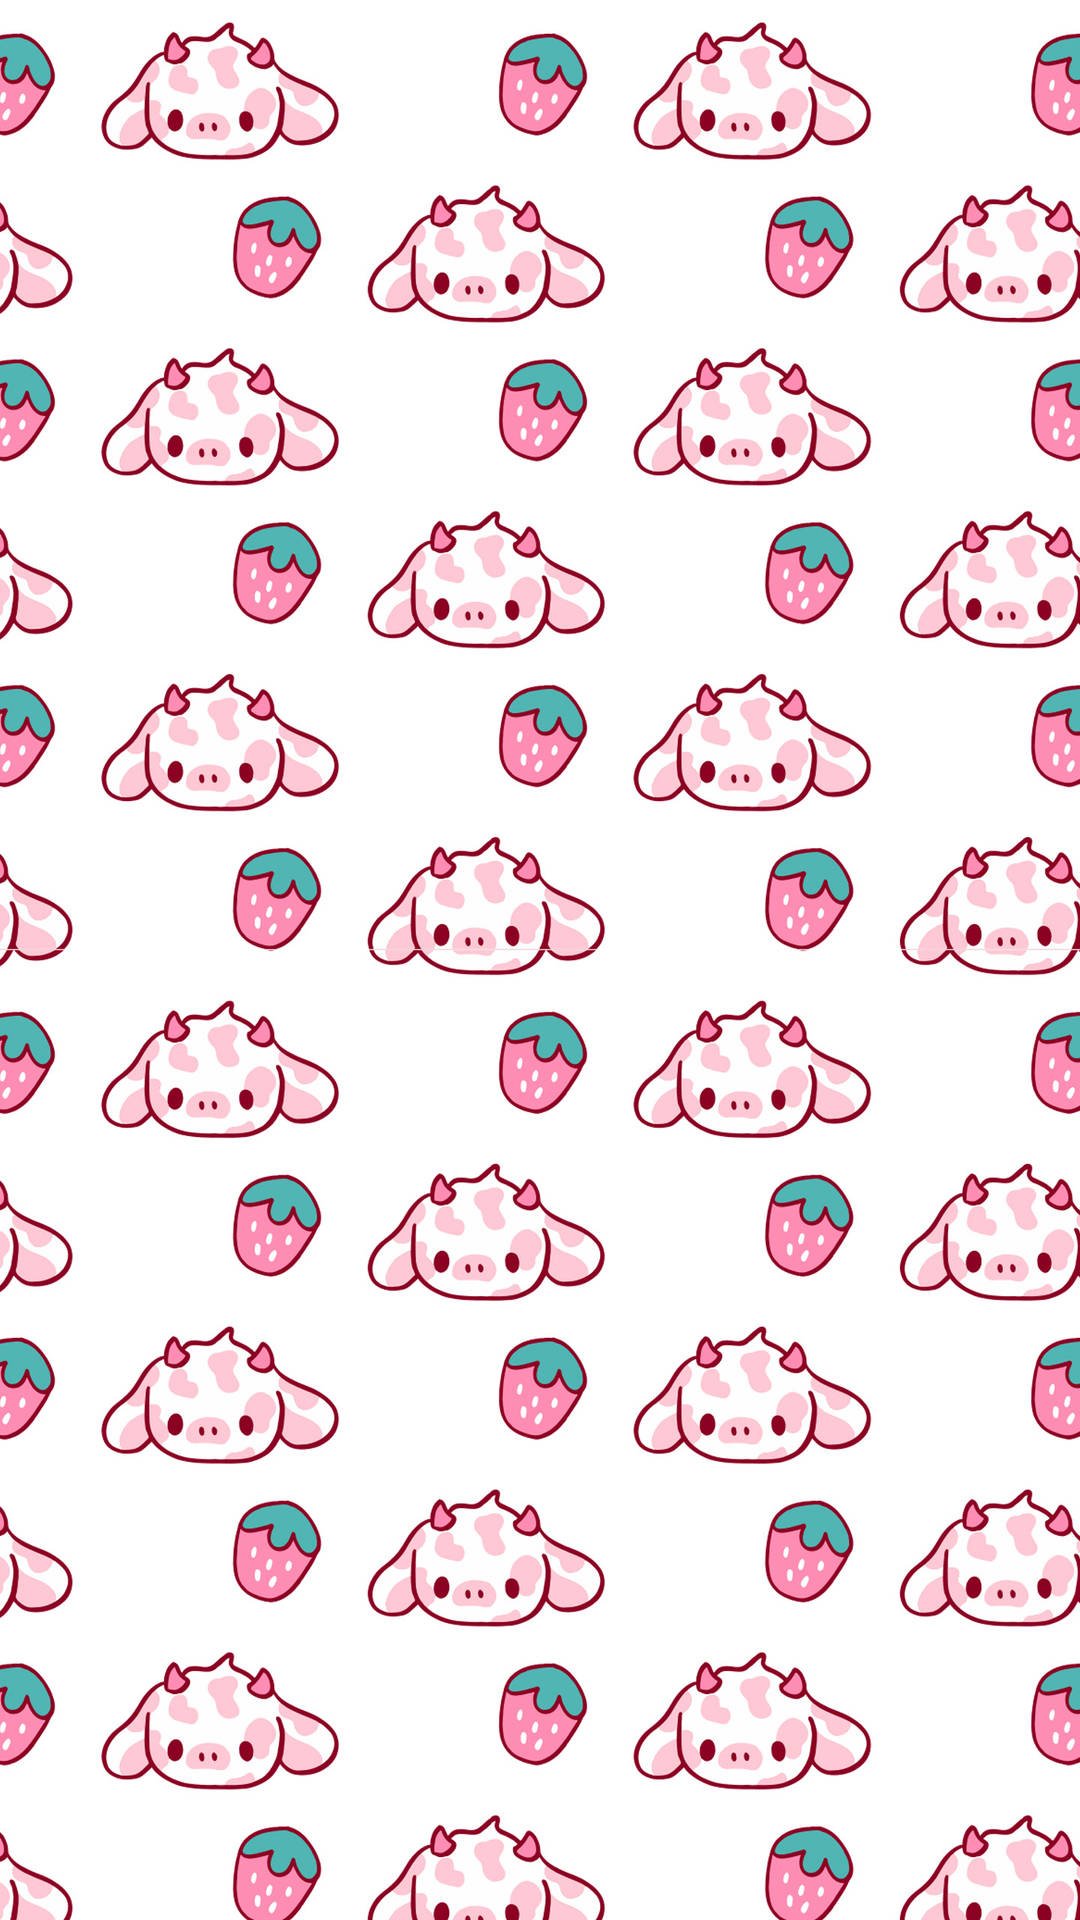 Strawberry Cow kawaii Photographic Print for Sale by MayBK